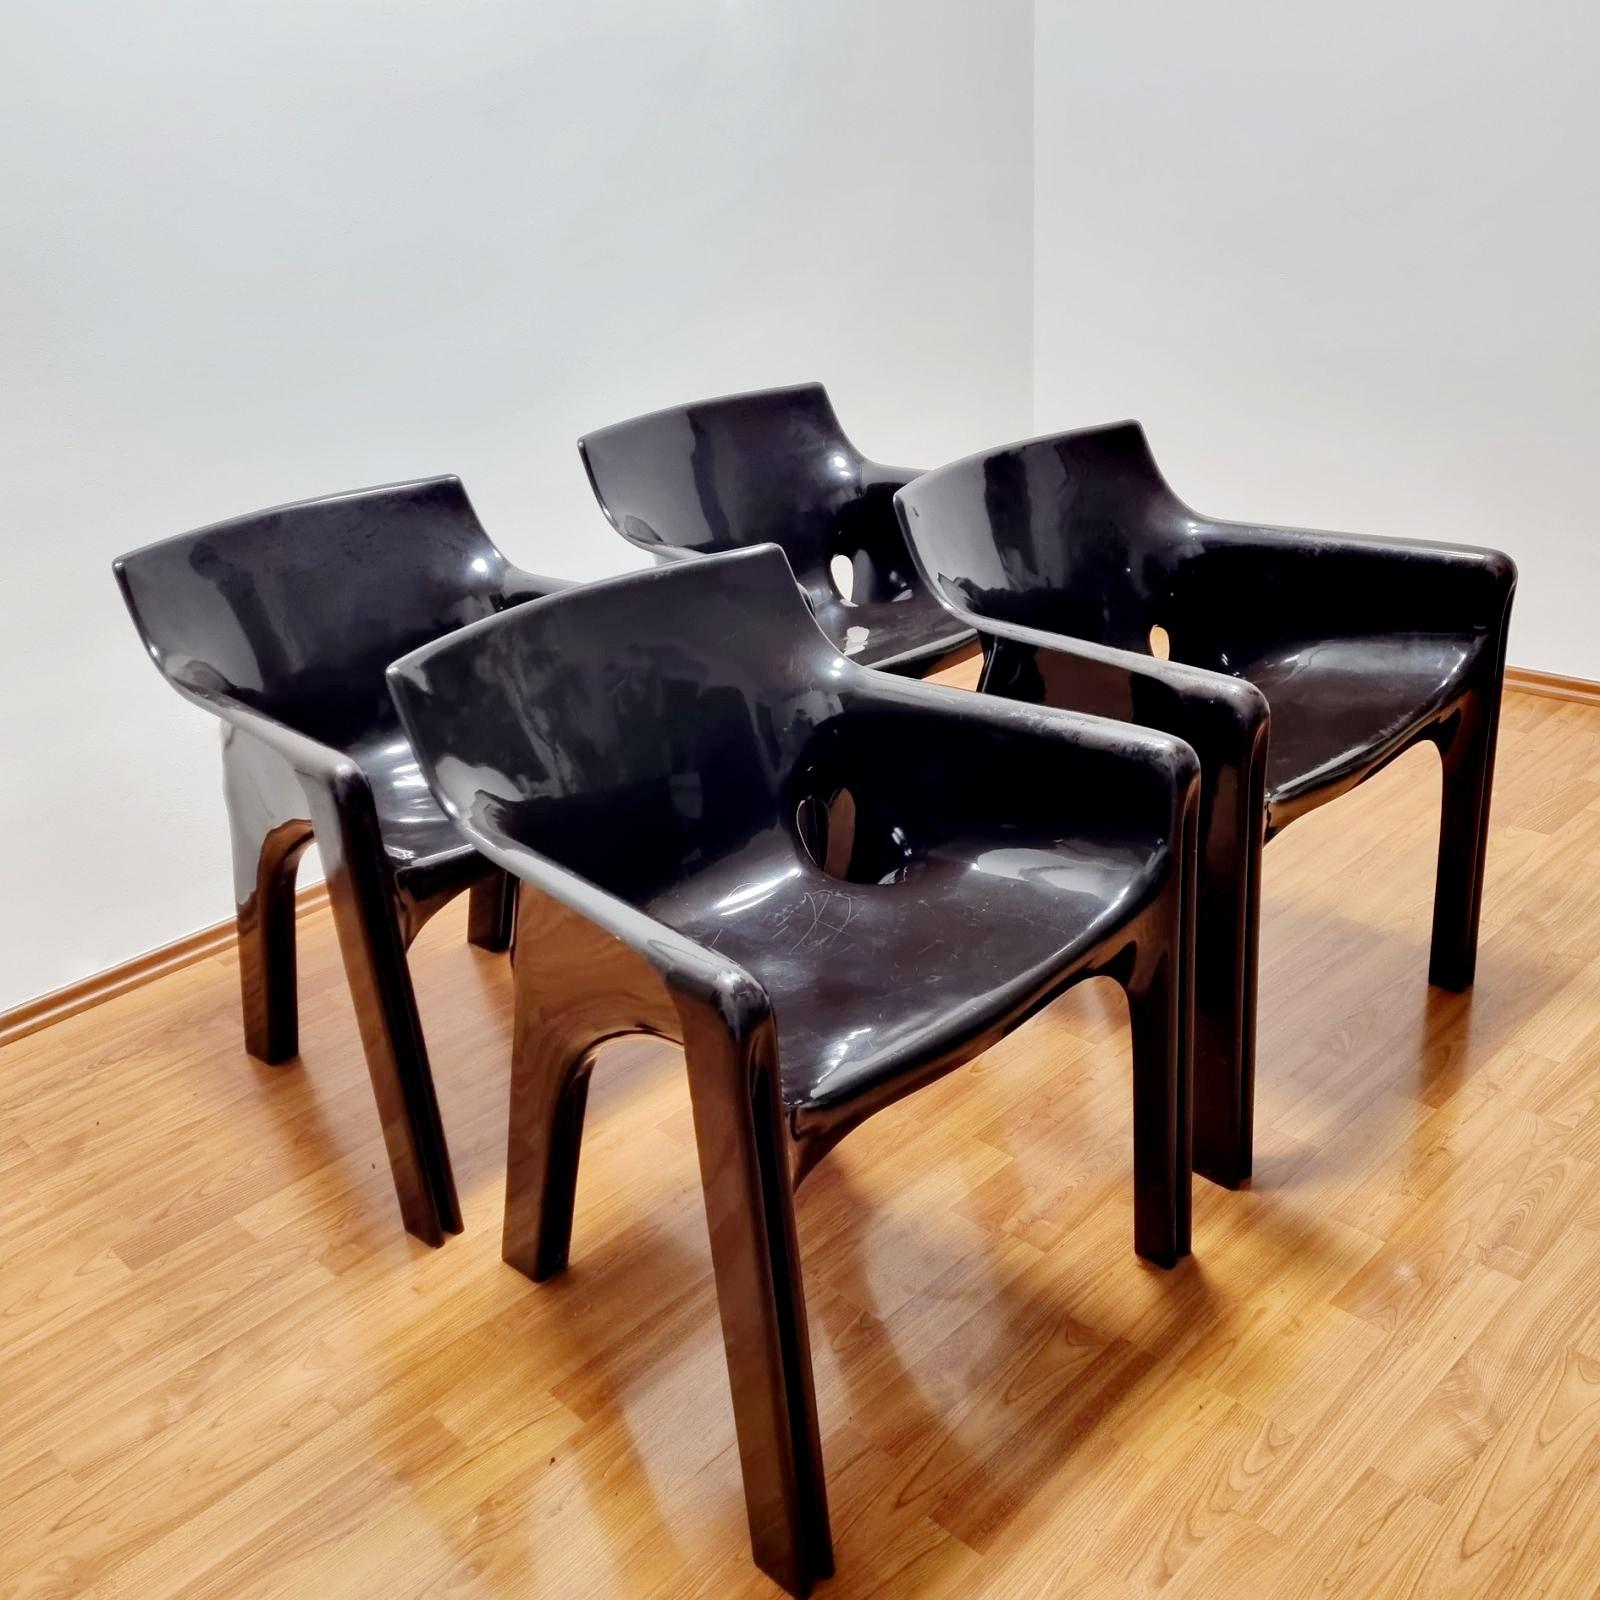 Set of 4 Italian Gaudi Chairs by Vico Magistretti for Artemide, Italy 70s For Sale 4